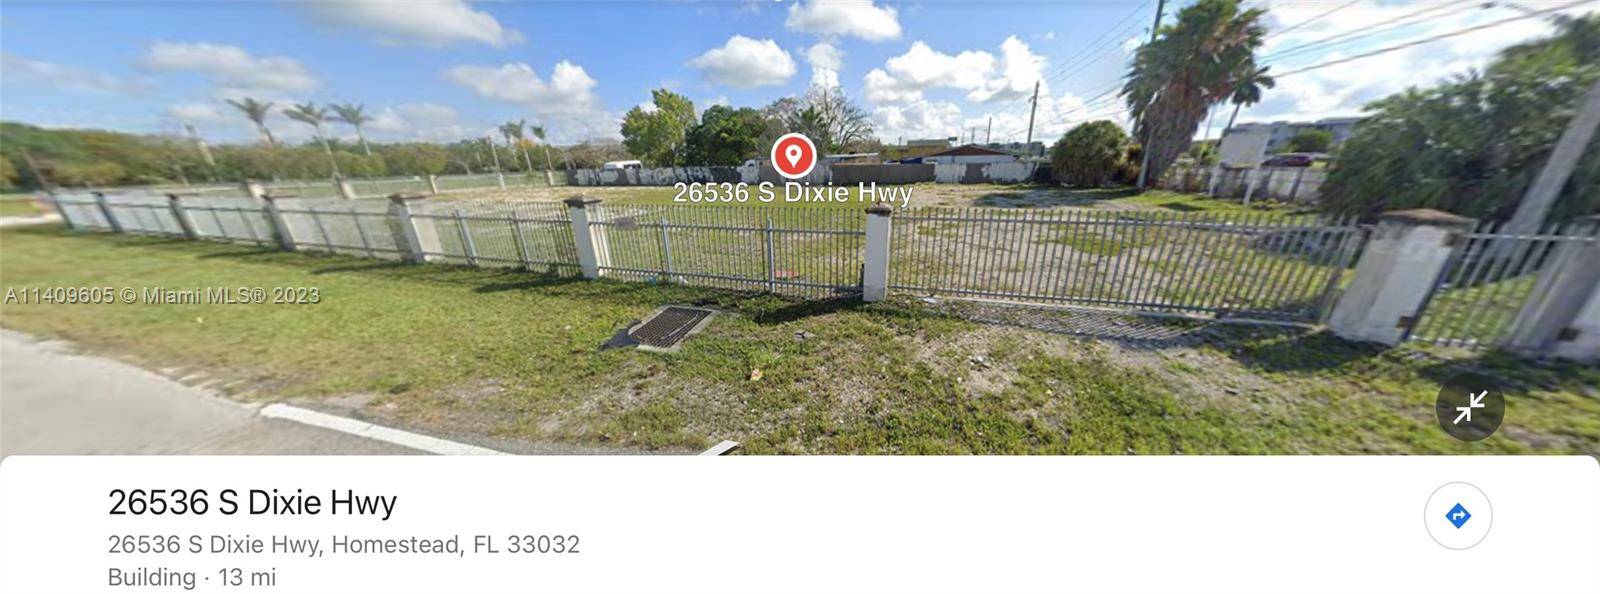 PRIME LOCATION IN NARANJA FLORIDA URBAN DISTRICT approved for MIXED USE MULTI FAMILY SPOT STRIP COMMERCIAL WHOLESALE FACILITIES NEIGHBORHOOD SHOPPING CENTER PLAZA.